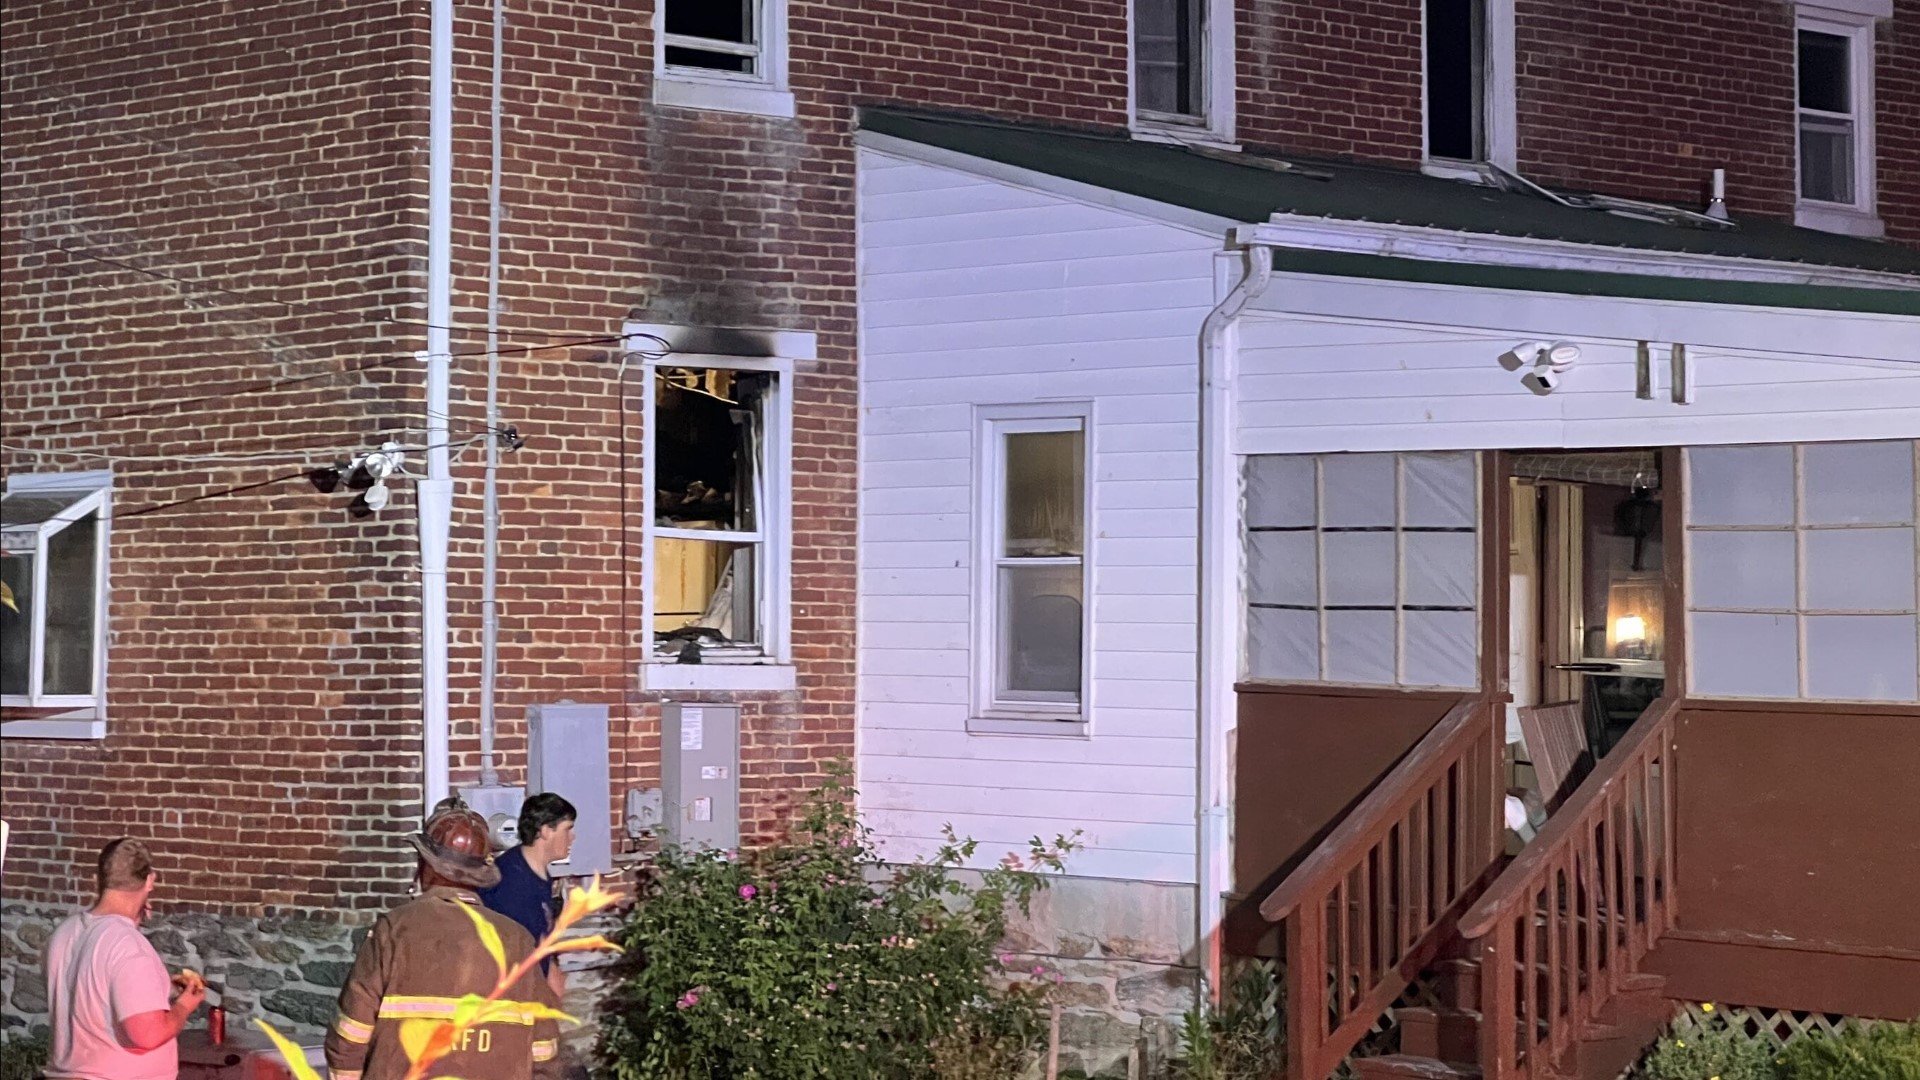 The coroner is at the scene of a fire in York County, 911 Dispatch confirmed early this morning. The blaze broke out shortly before 12:30 a.m.